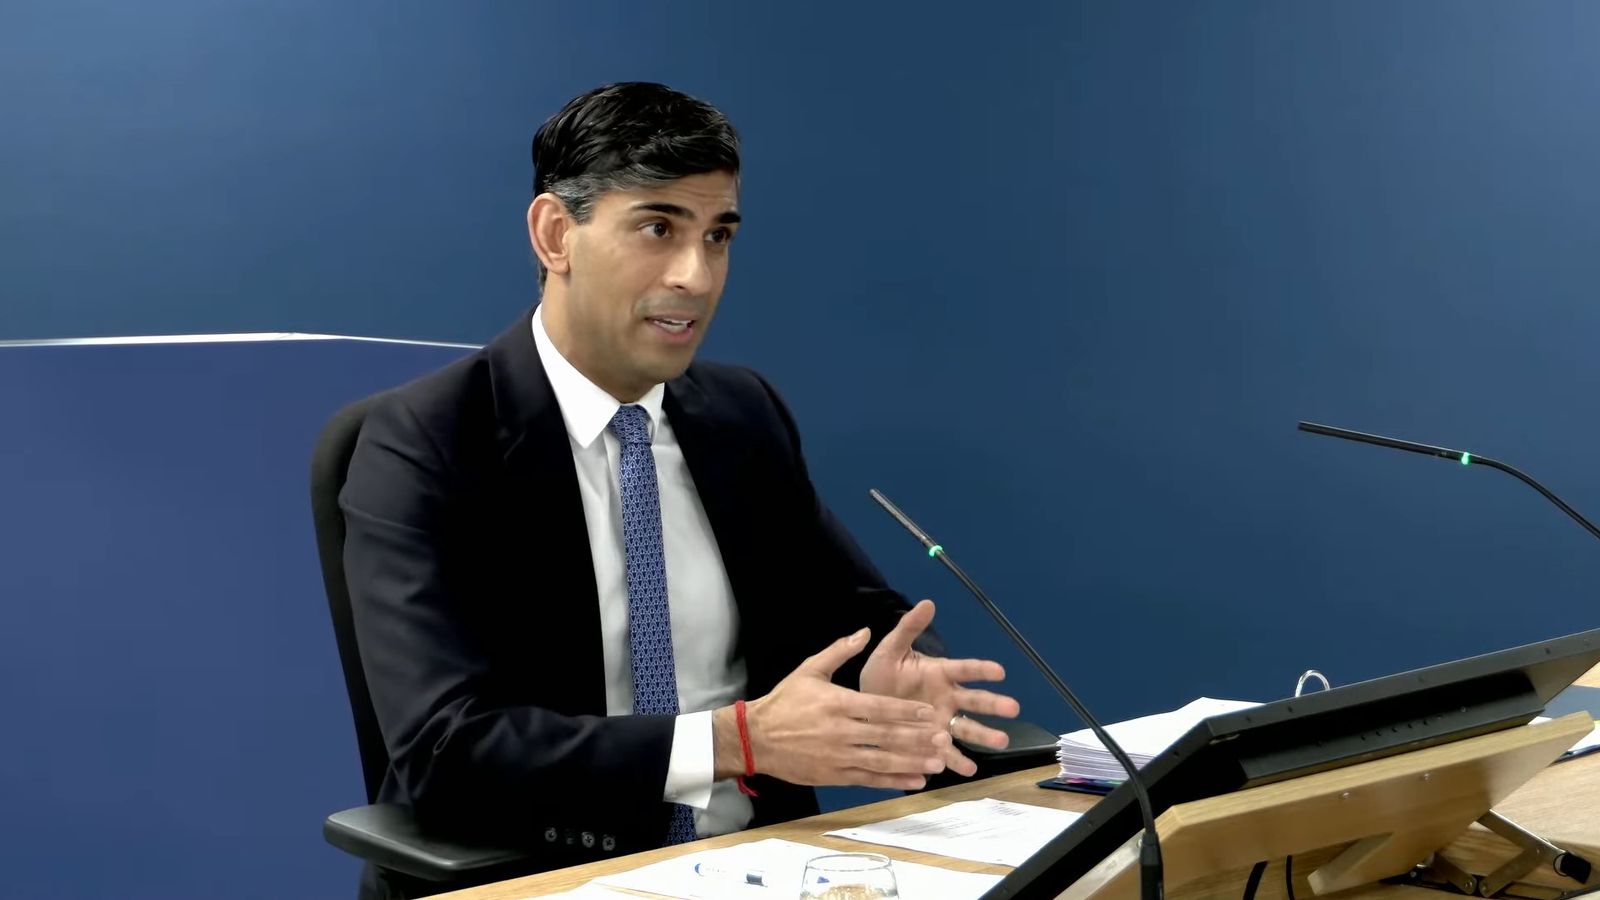 COVID inquiry: Rishi Sunak says advisers had 'ample opportunity' to raise concerns over Eat Out - Sunak